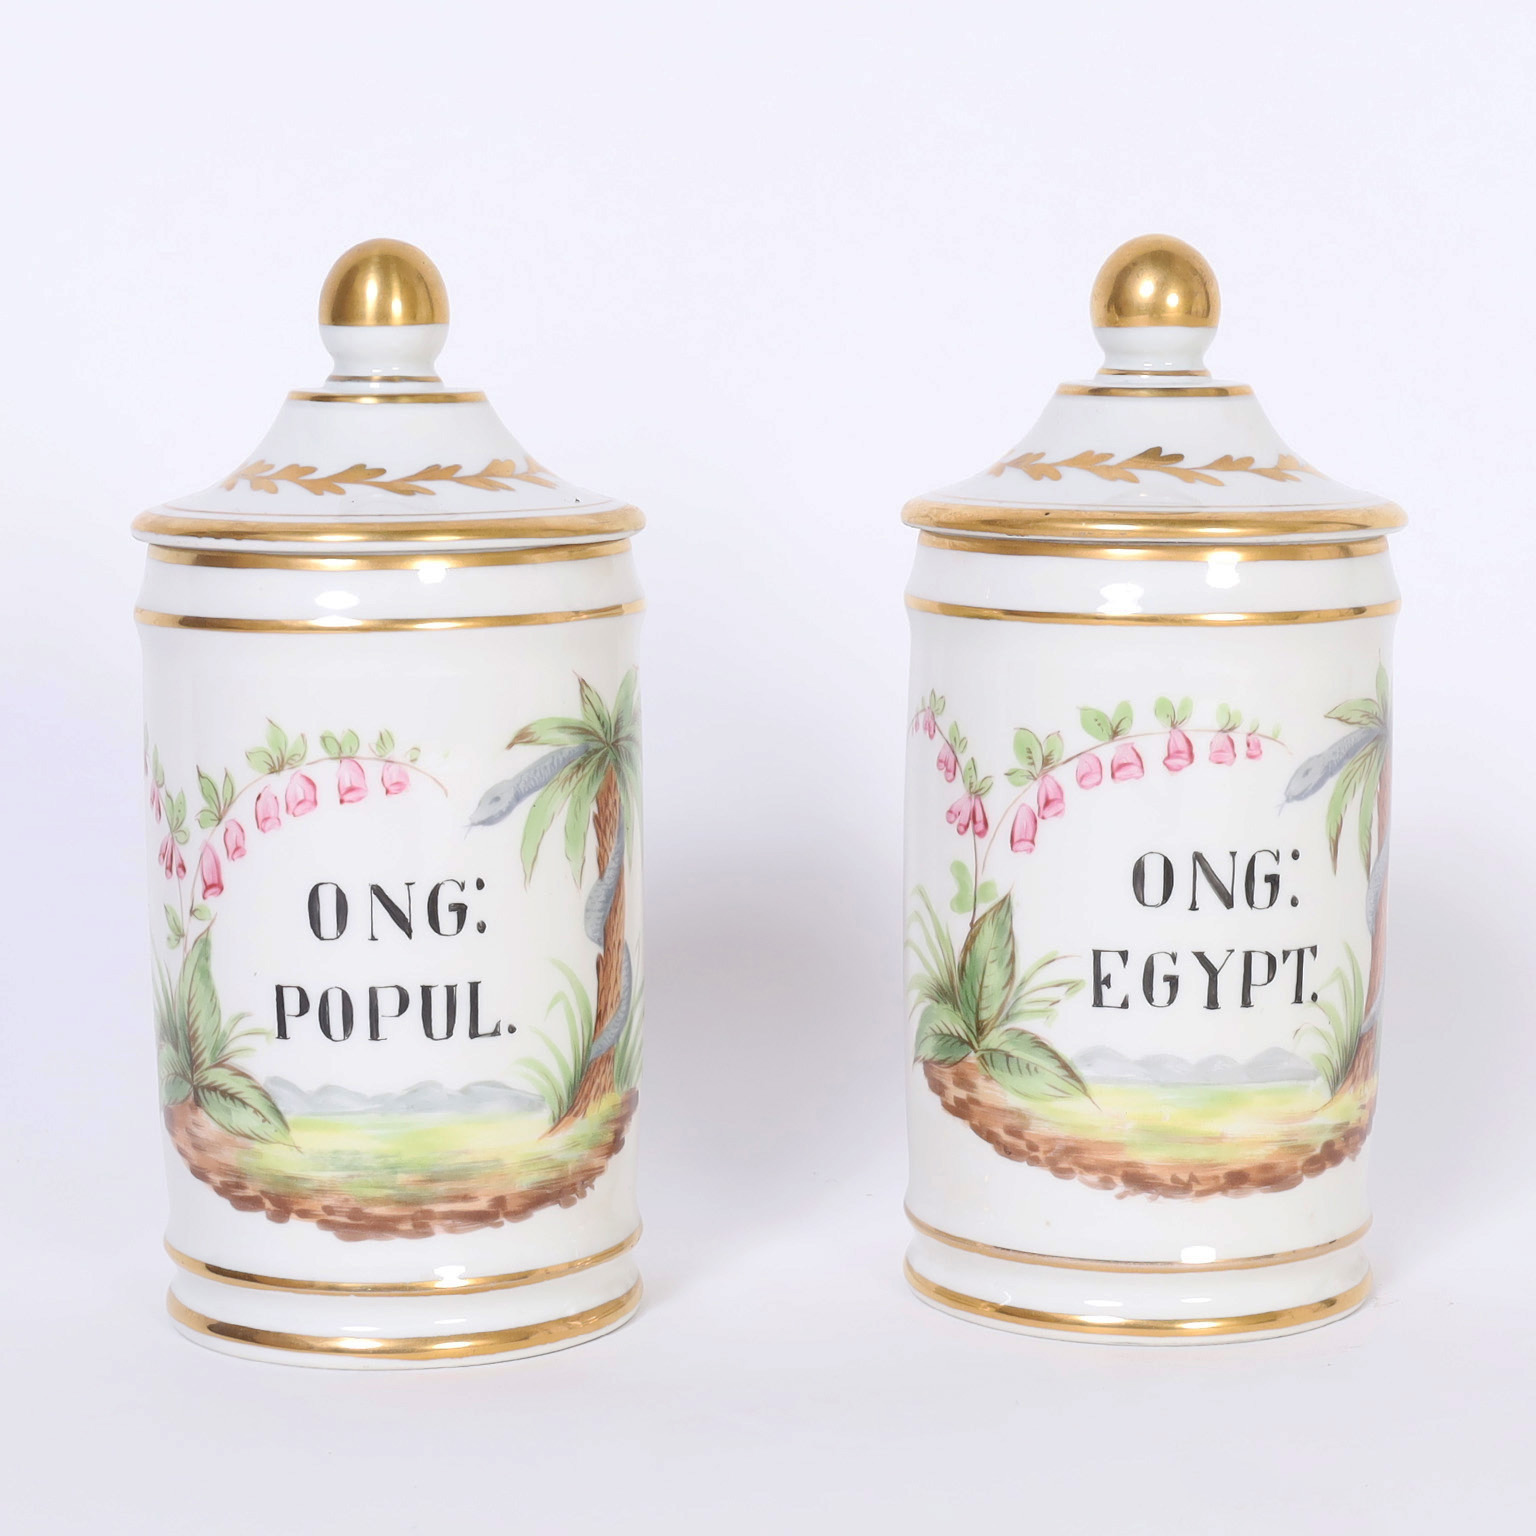 Pair of French Porcelain Apothecary Jars